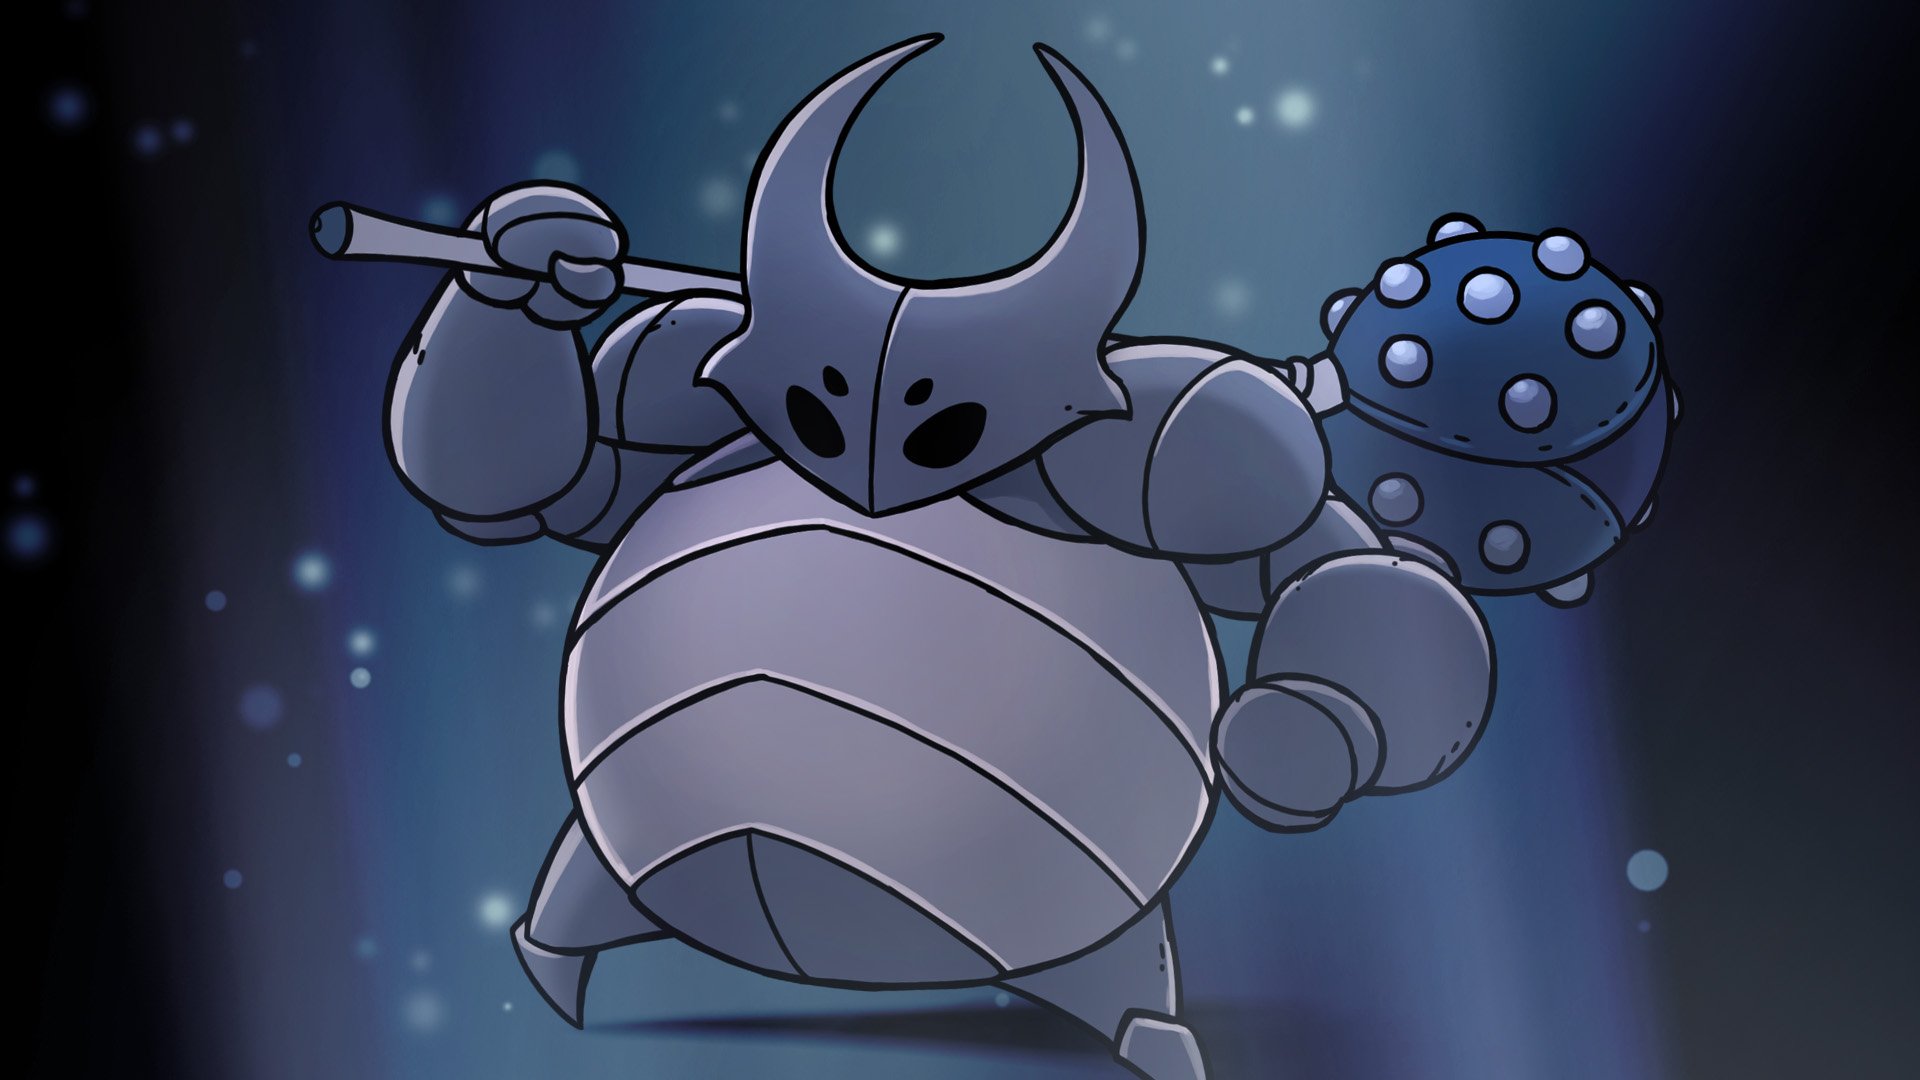 Hollow Knight Hd Wallpaper Background Image 1920x1080